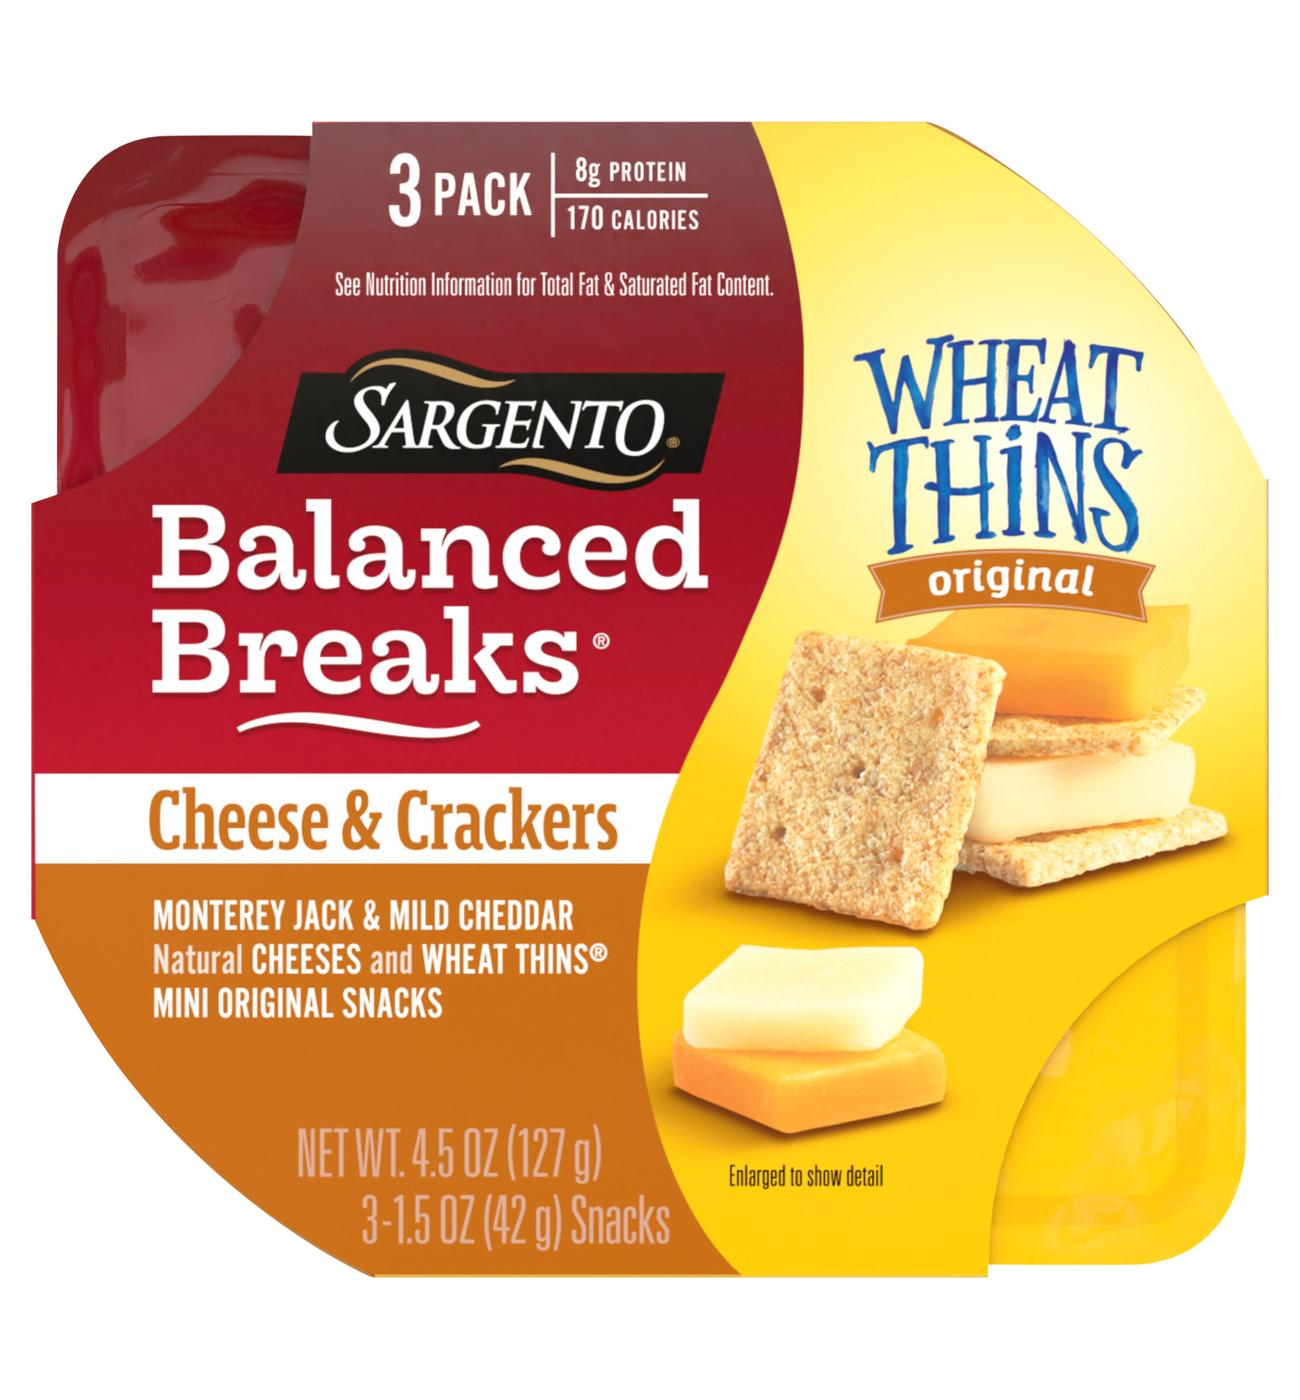 SARGENTO Balanced Breaks Snack Trays - Monterey Jack & Mild Cheddar Cheese with Wheat Thins Mini Original Snacks; image 1 of 2